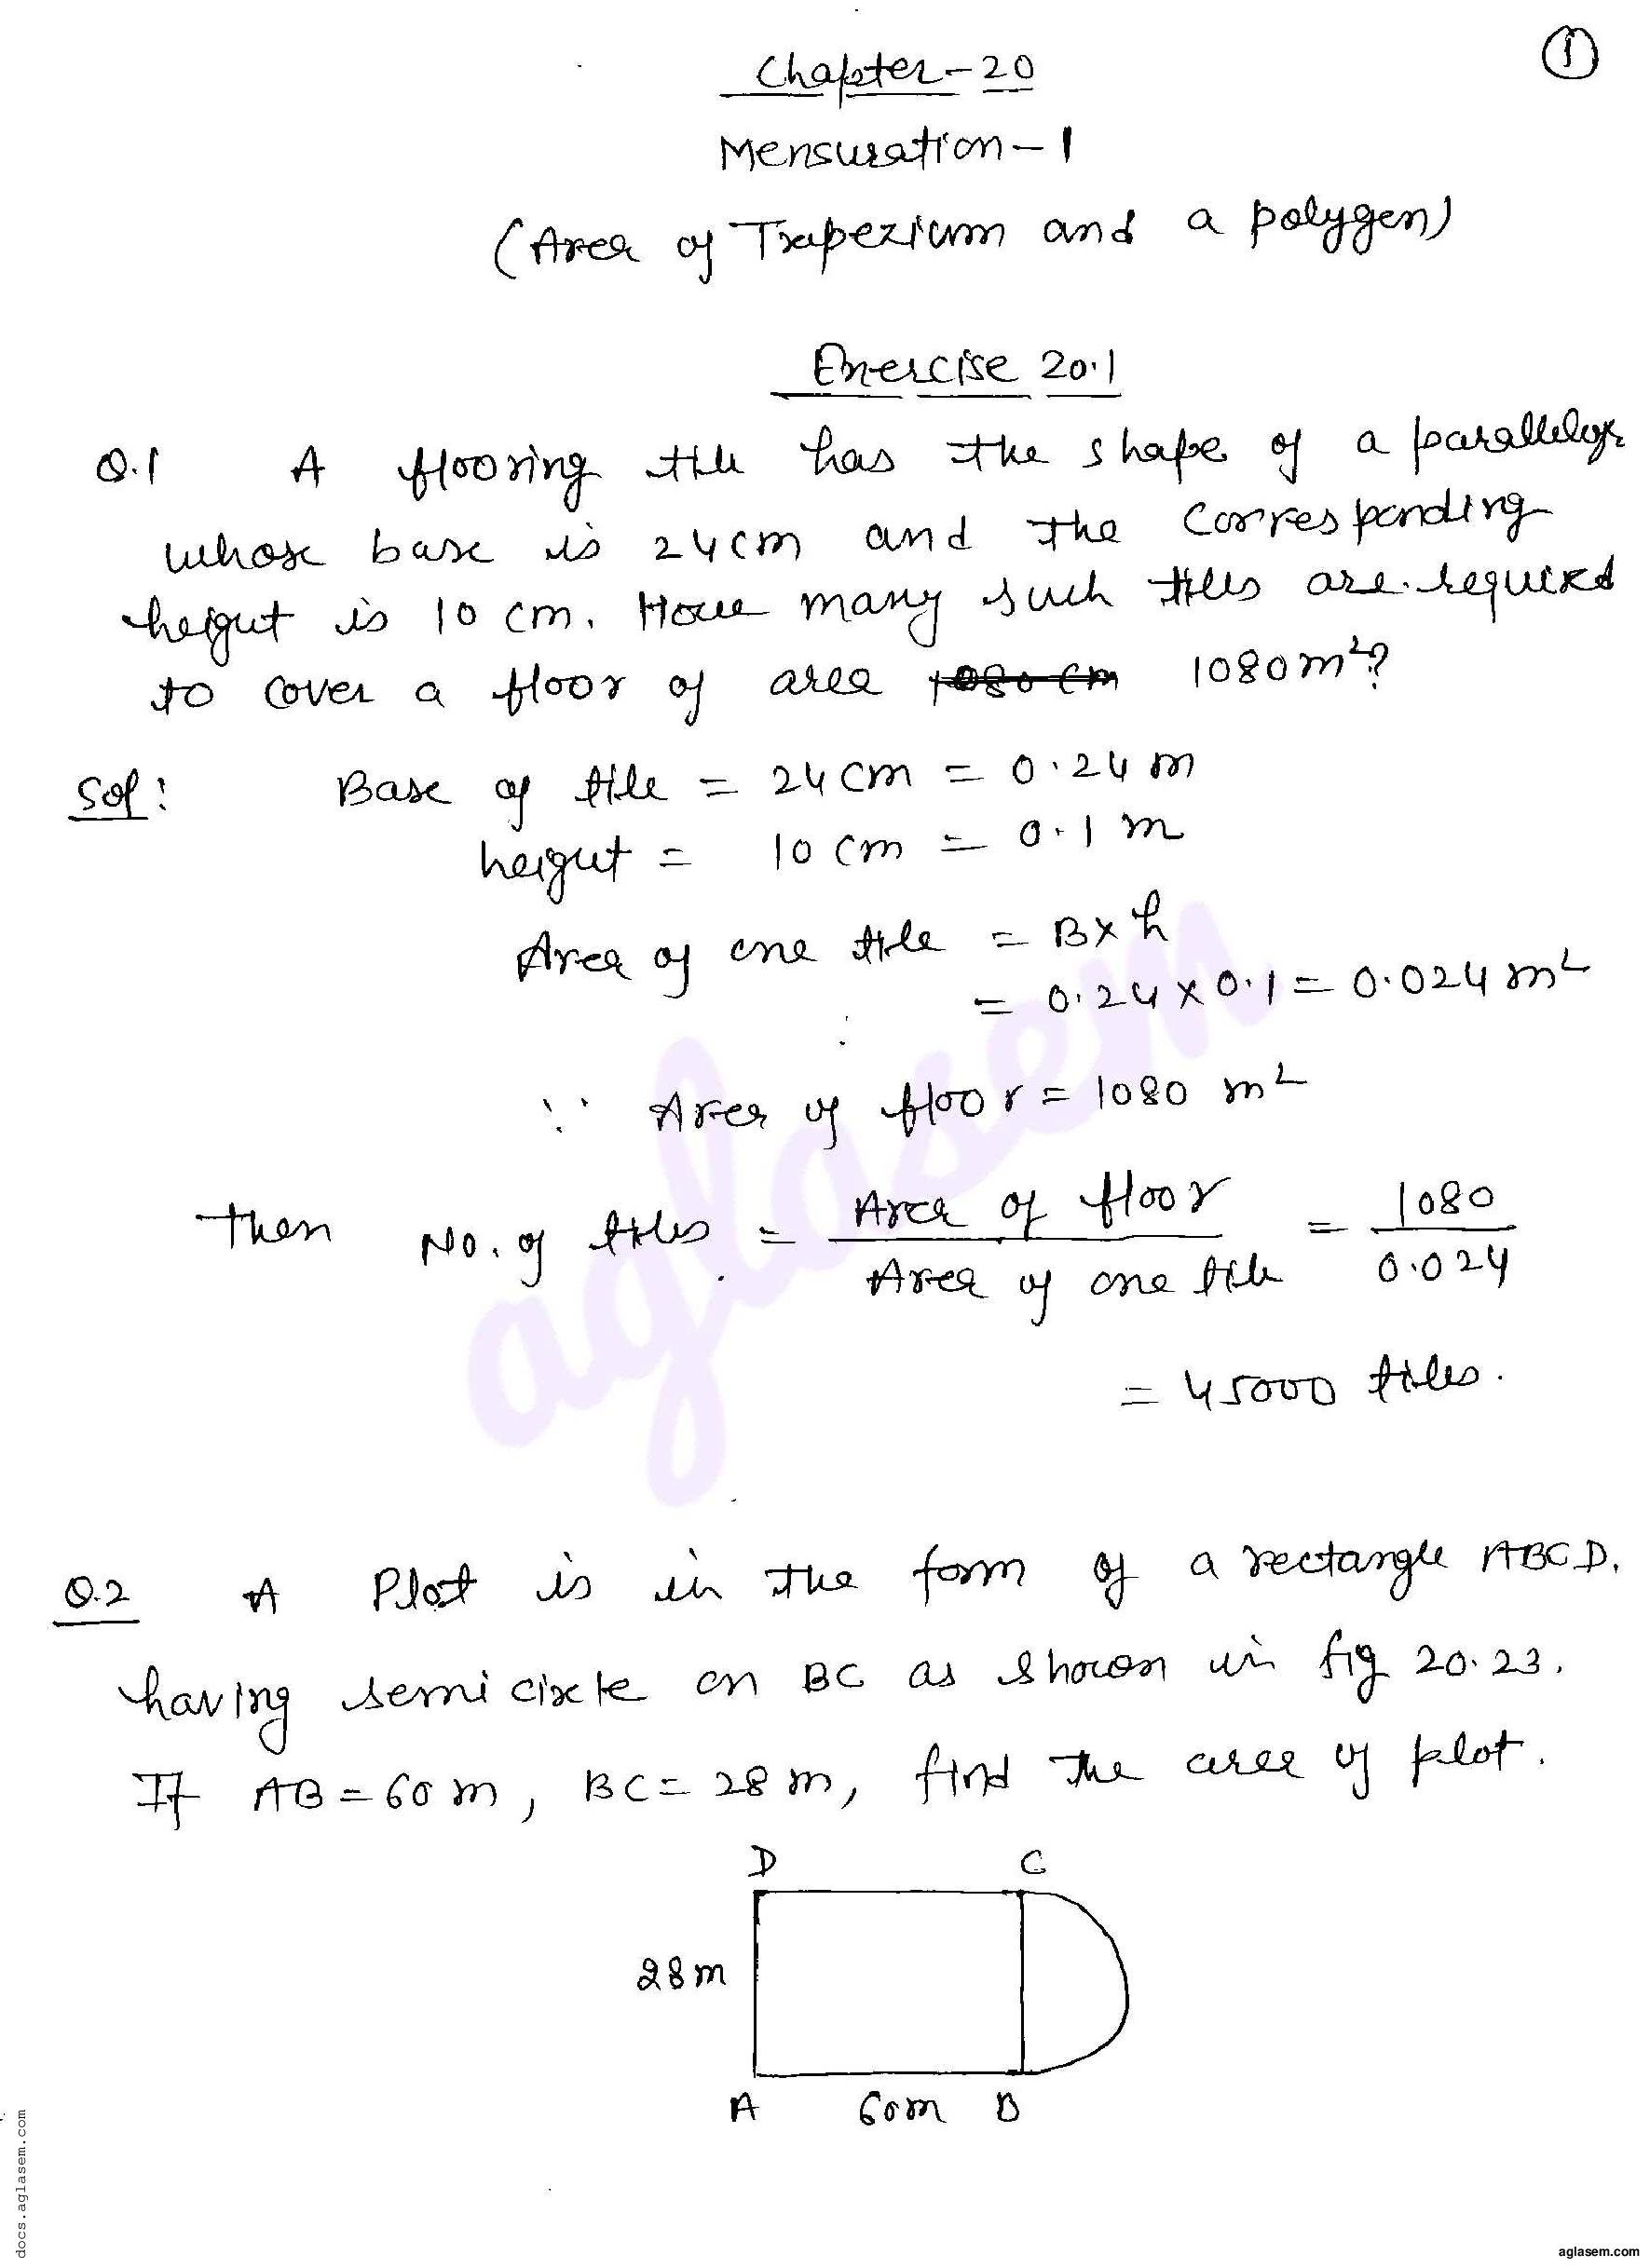 RD Sharma Solutions Class 8 Chapter 20 Mensuration I Area of a Trapezium and a Polygon Exercise 20.1 - Page 1